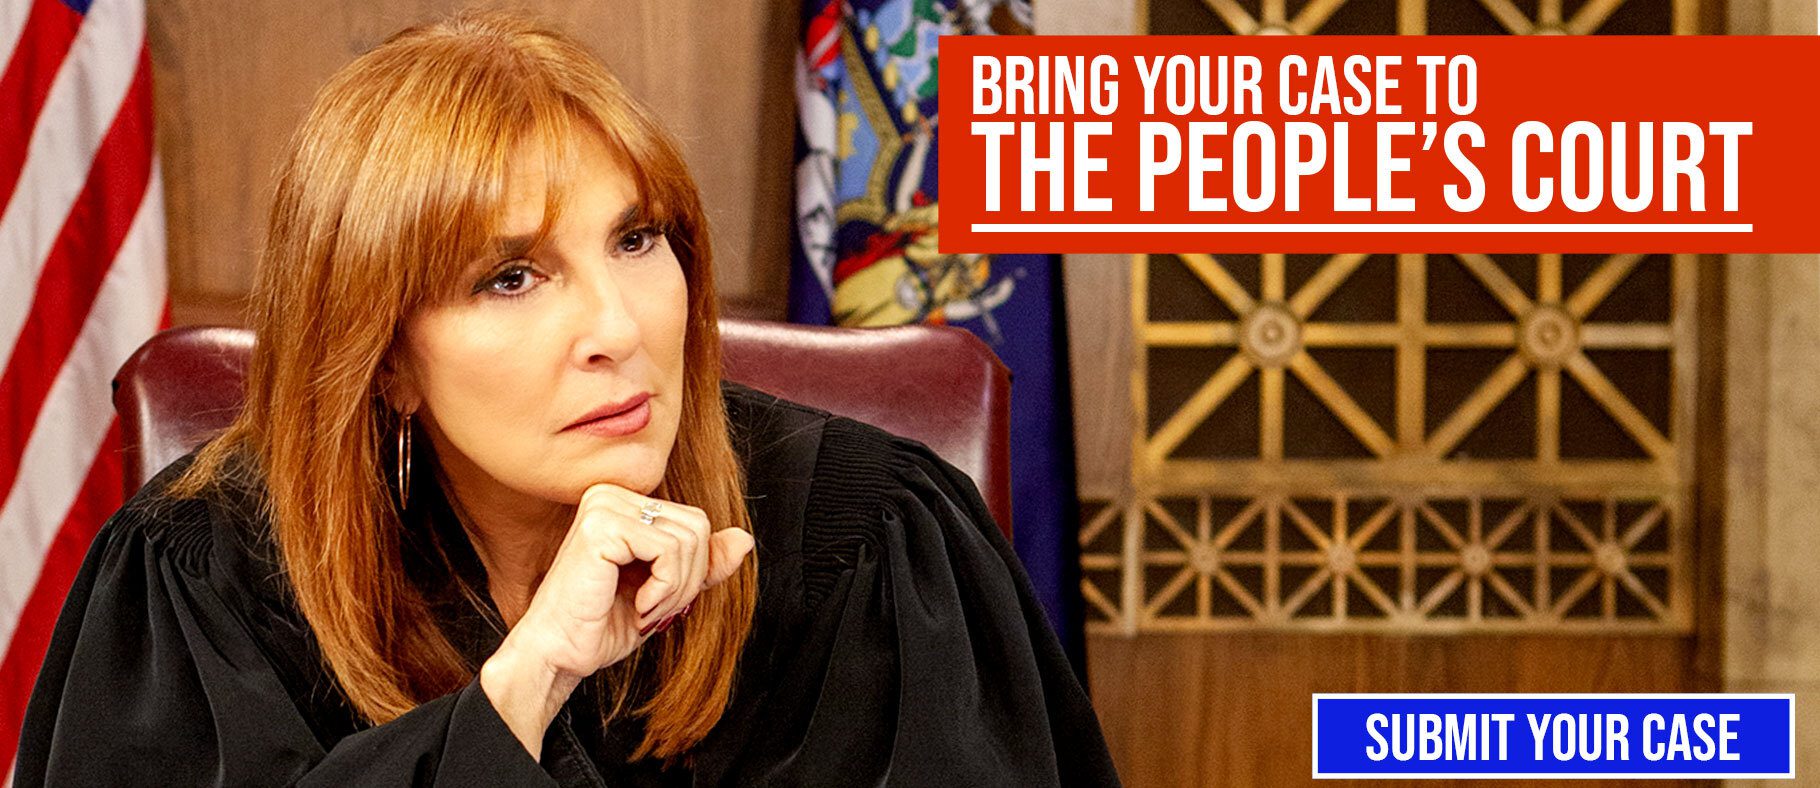 The People's Court Season 26 Episode 24 Release Date and Streaming